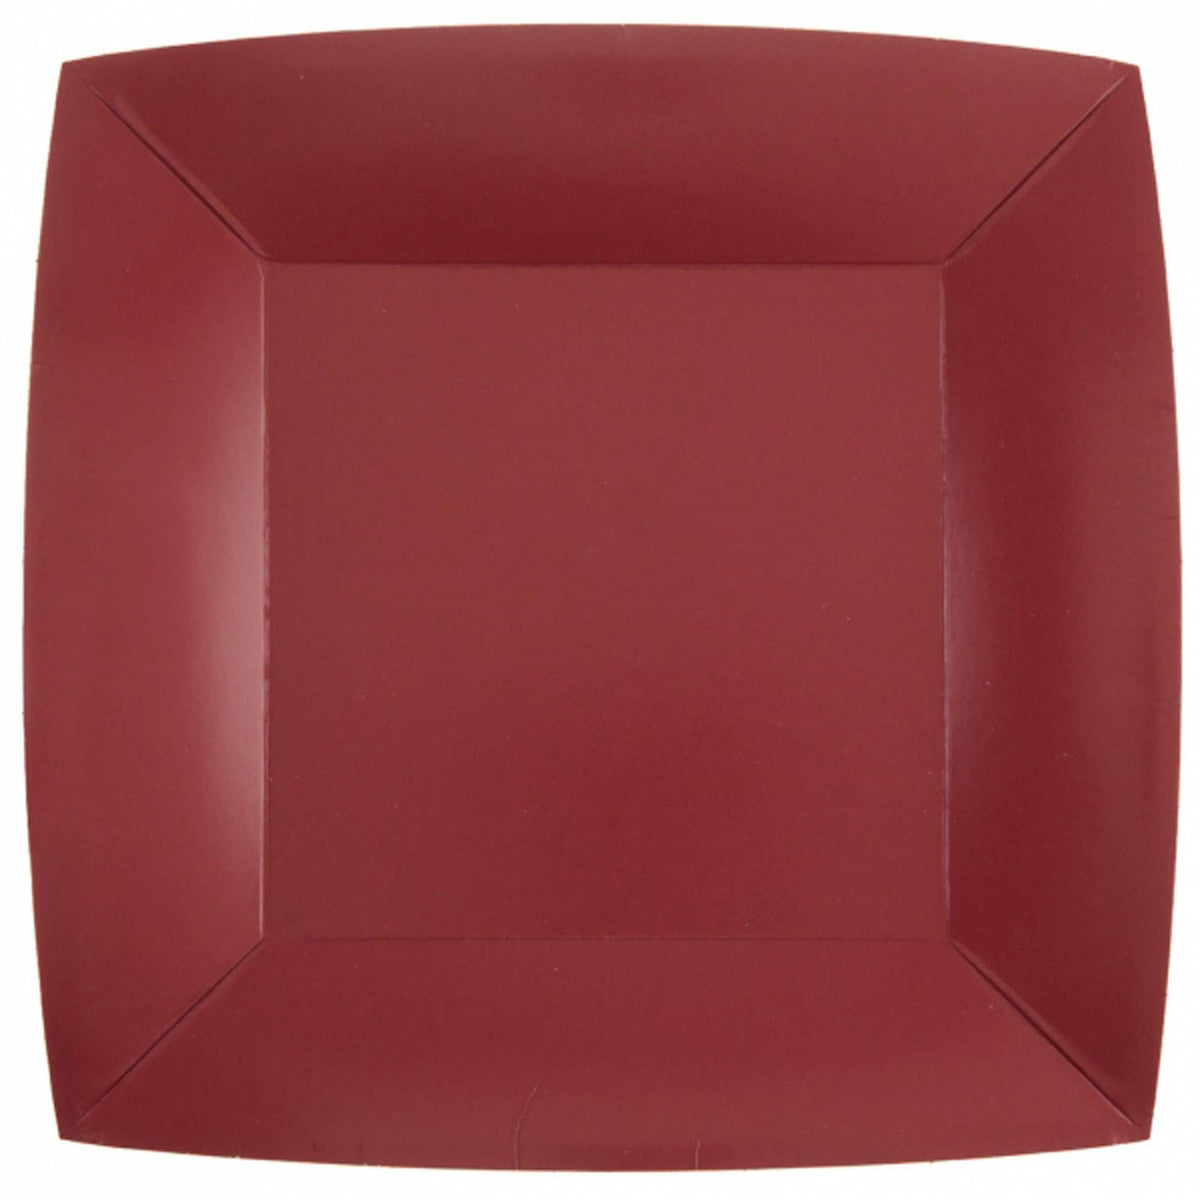 SANTEX Everyday Entertaining Burgundy Red Large Square Compostable Lunch Paper Plates, 9 Inches, 10 Count 3660380072256